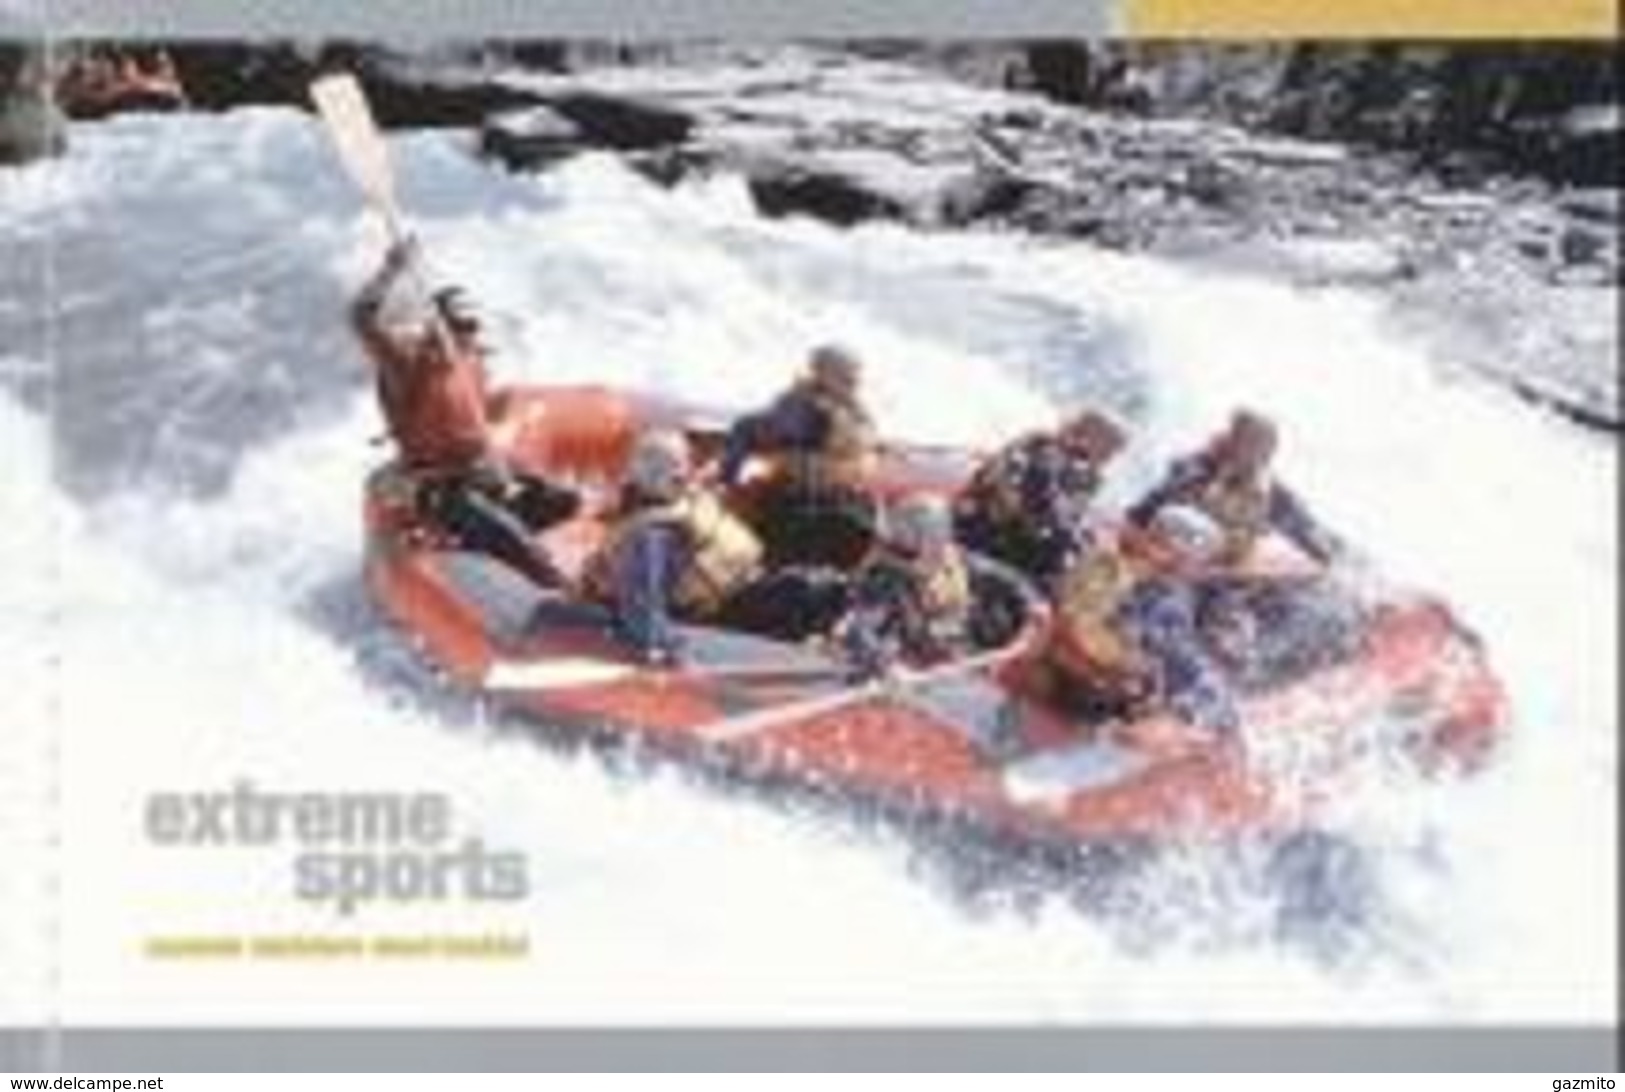 New Zeland 2004, Extreme Sports, Rafting, Snowsports, Skydiving, Booklet - Skateboard